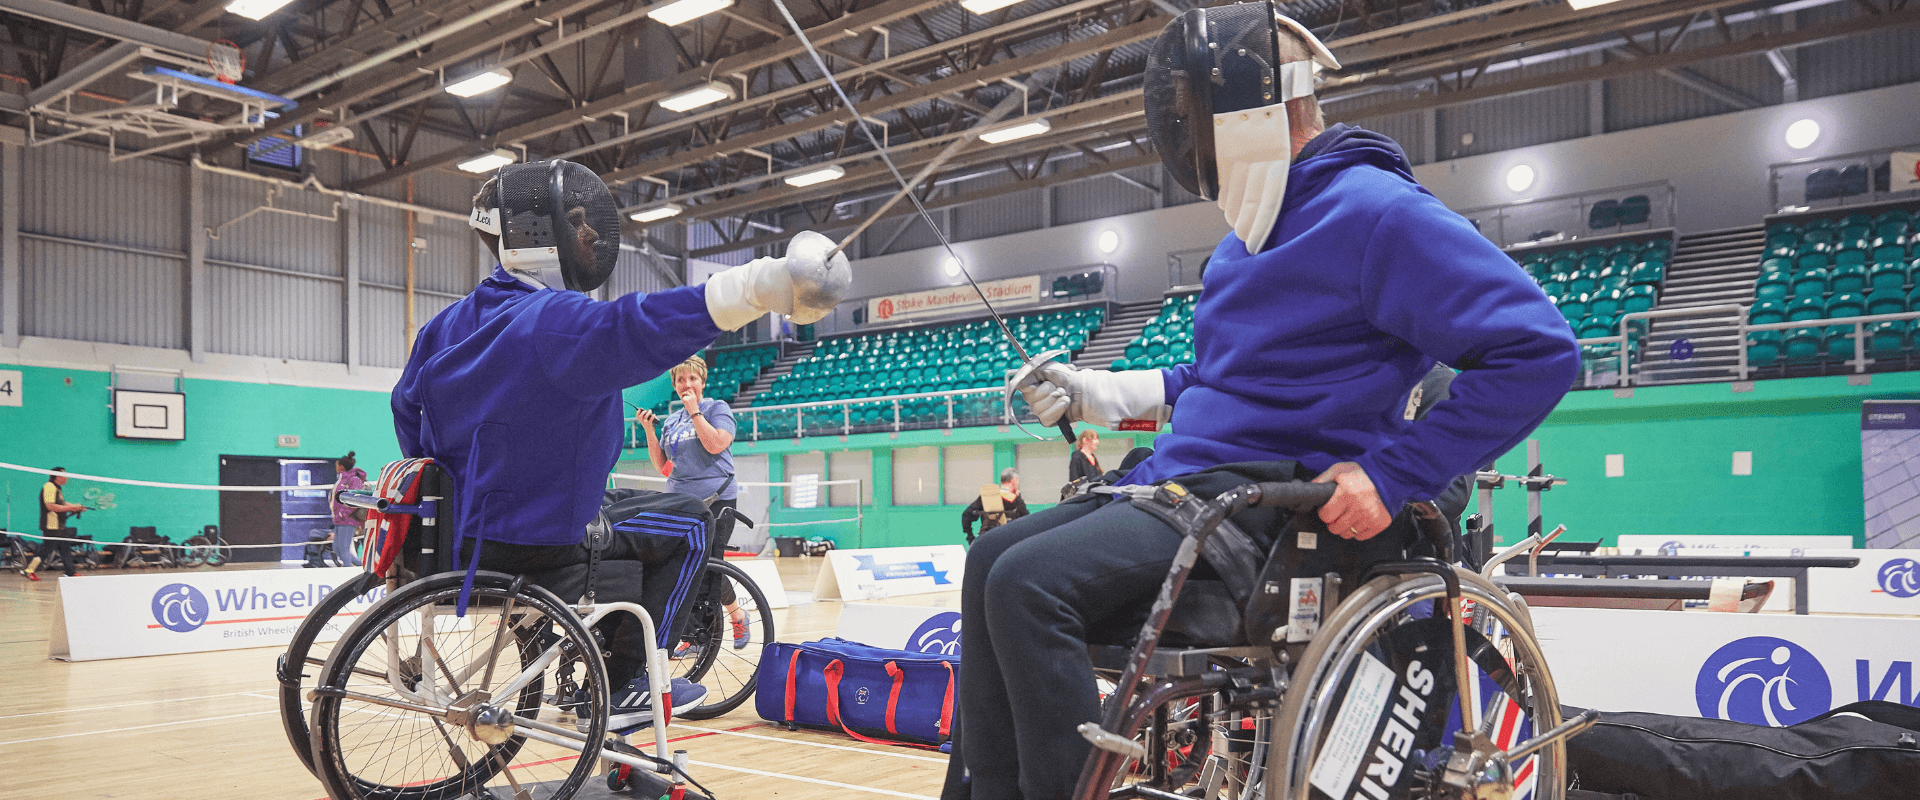 Inter Spinal Unit Games 2019 Fencing